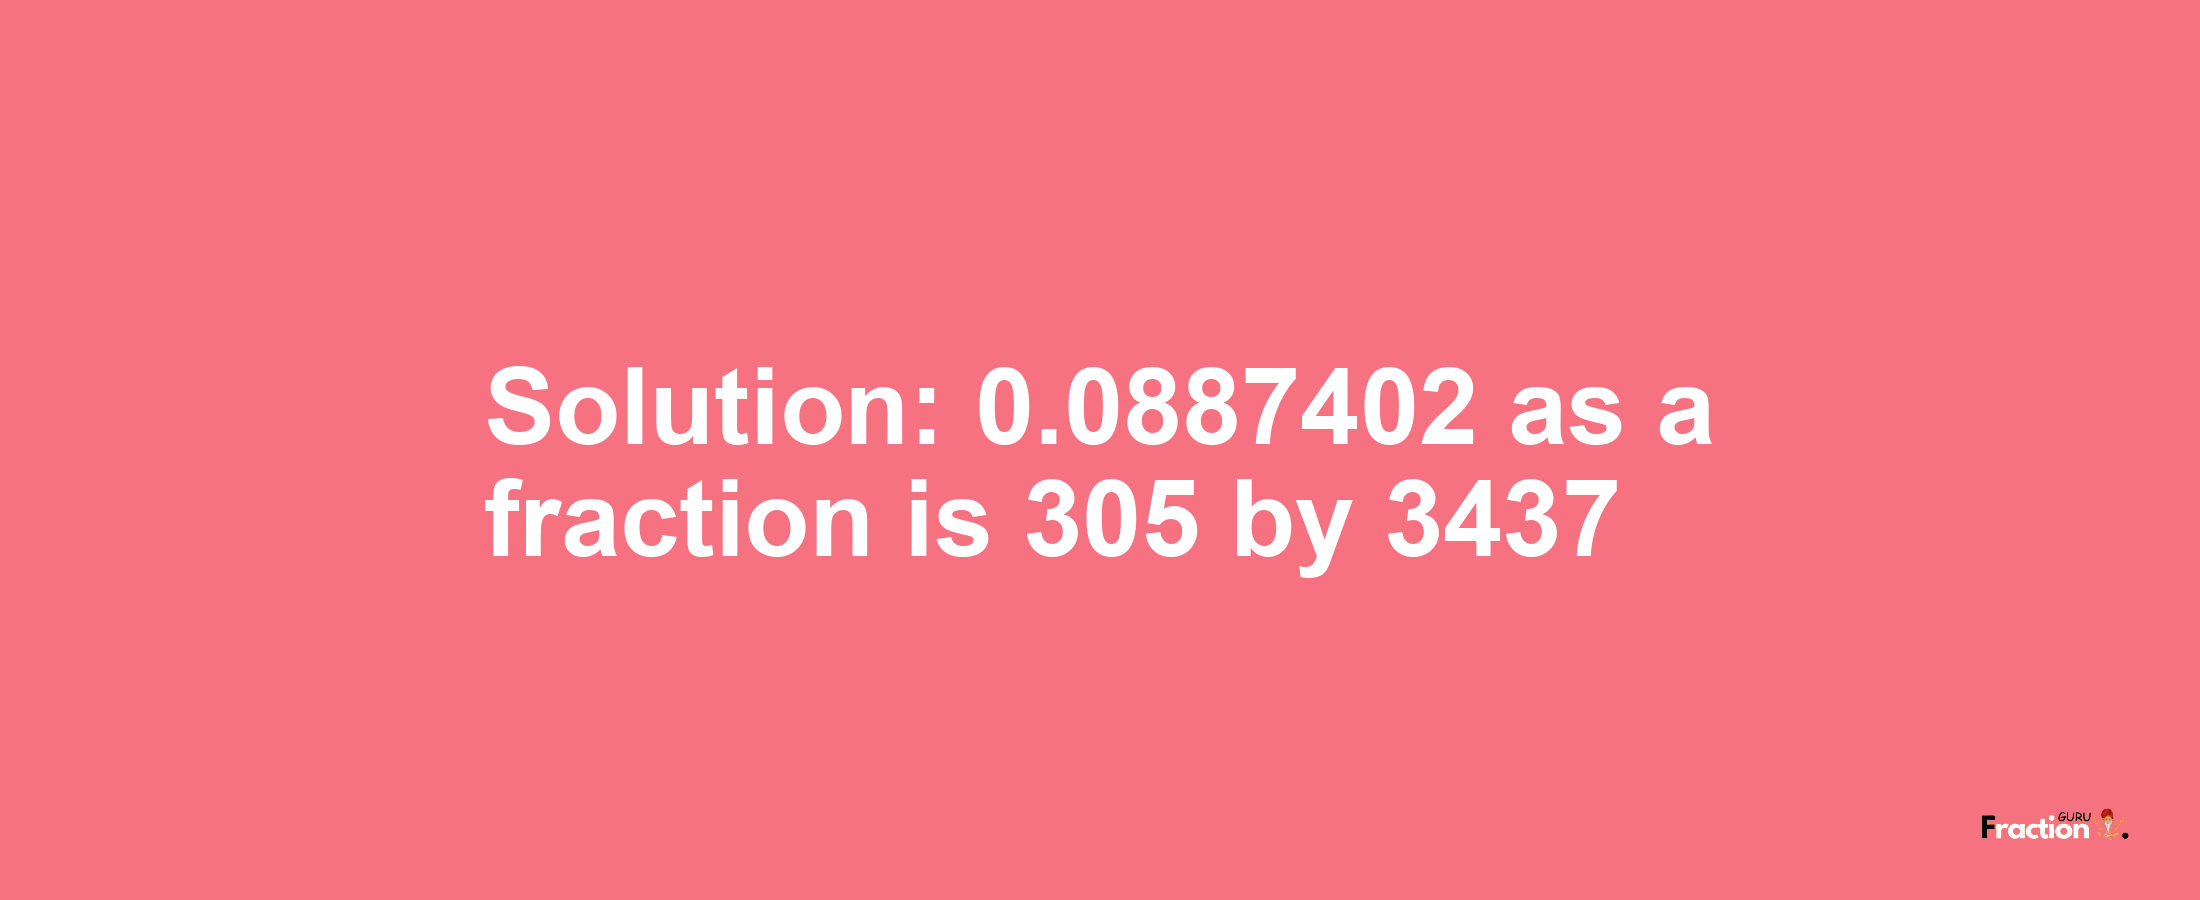 Solution:0.0887402 as a fraction is 305/3437